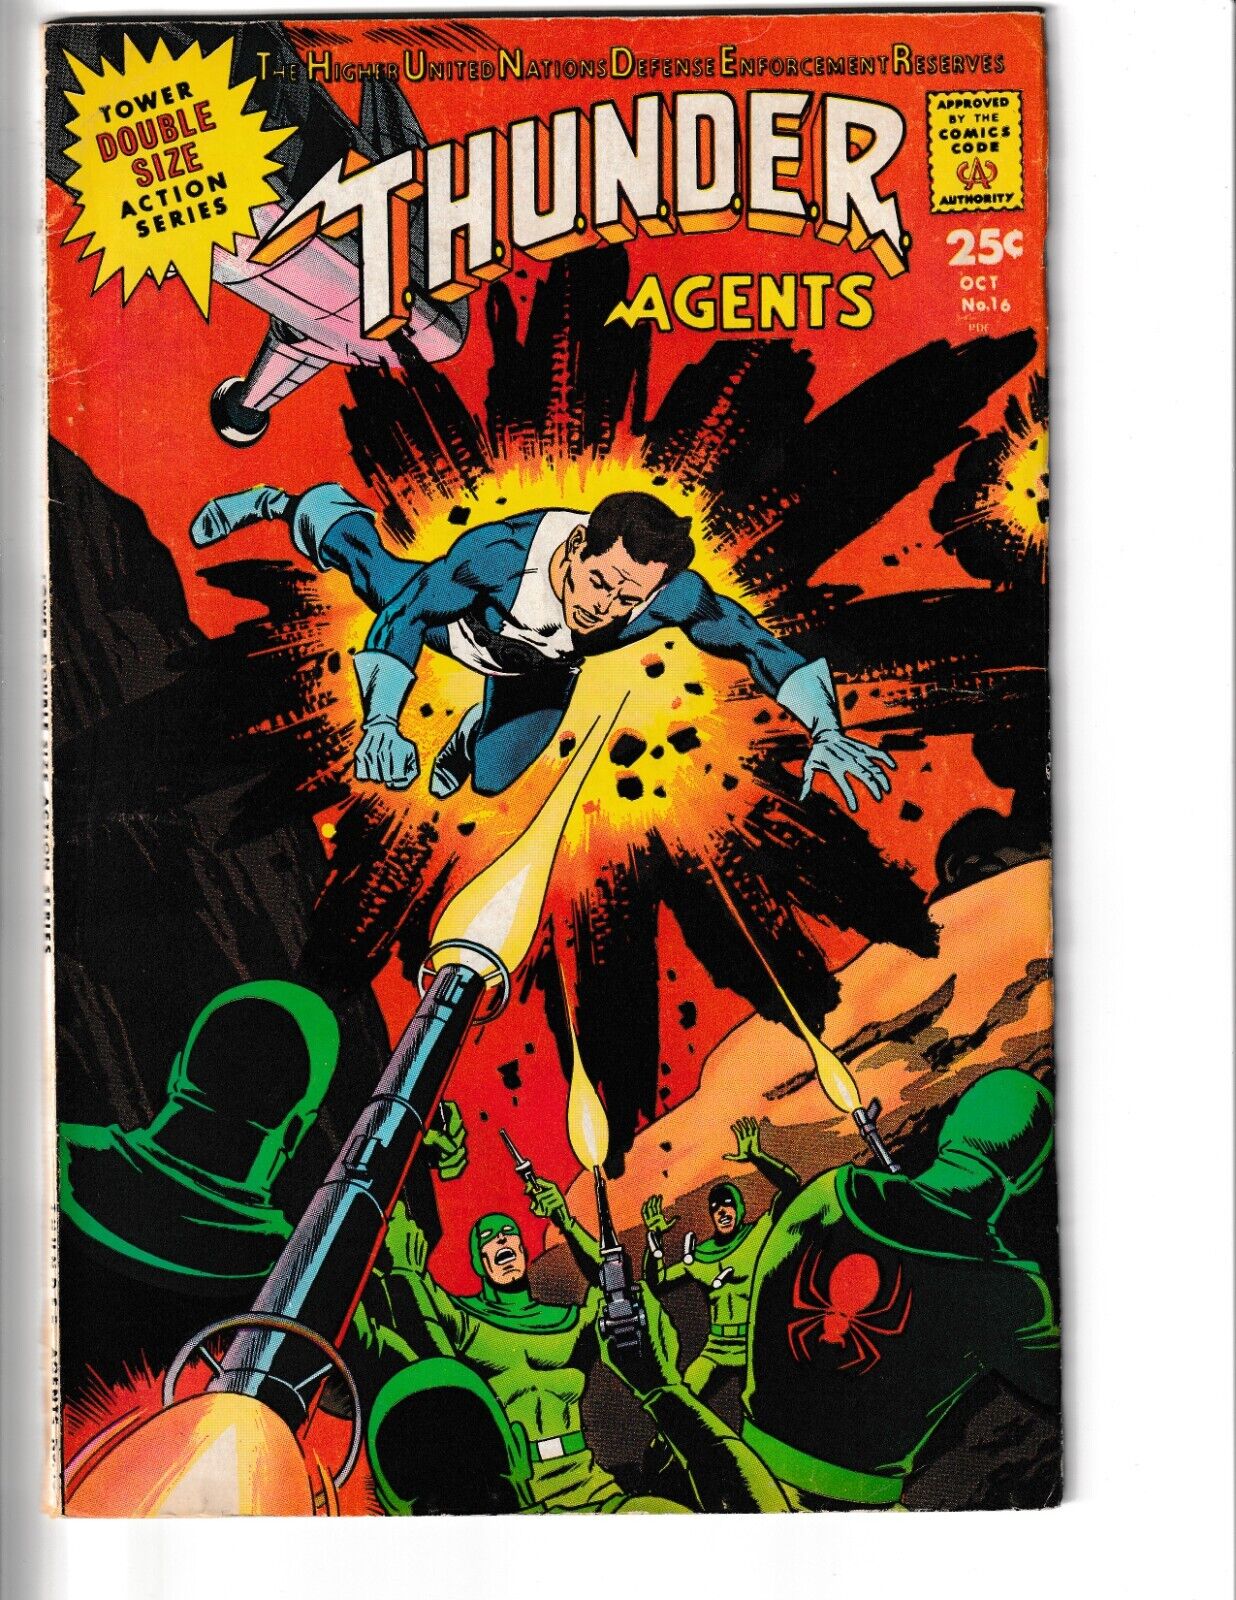 THUNDER Agents 1-20 (Tower Comics, 1965) Pick Your Book, Complete Your Run